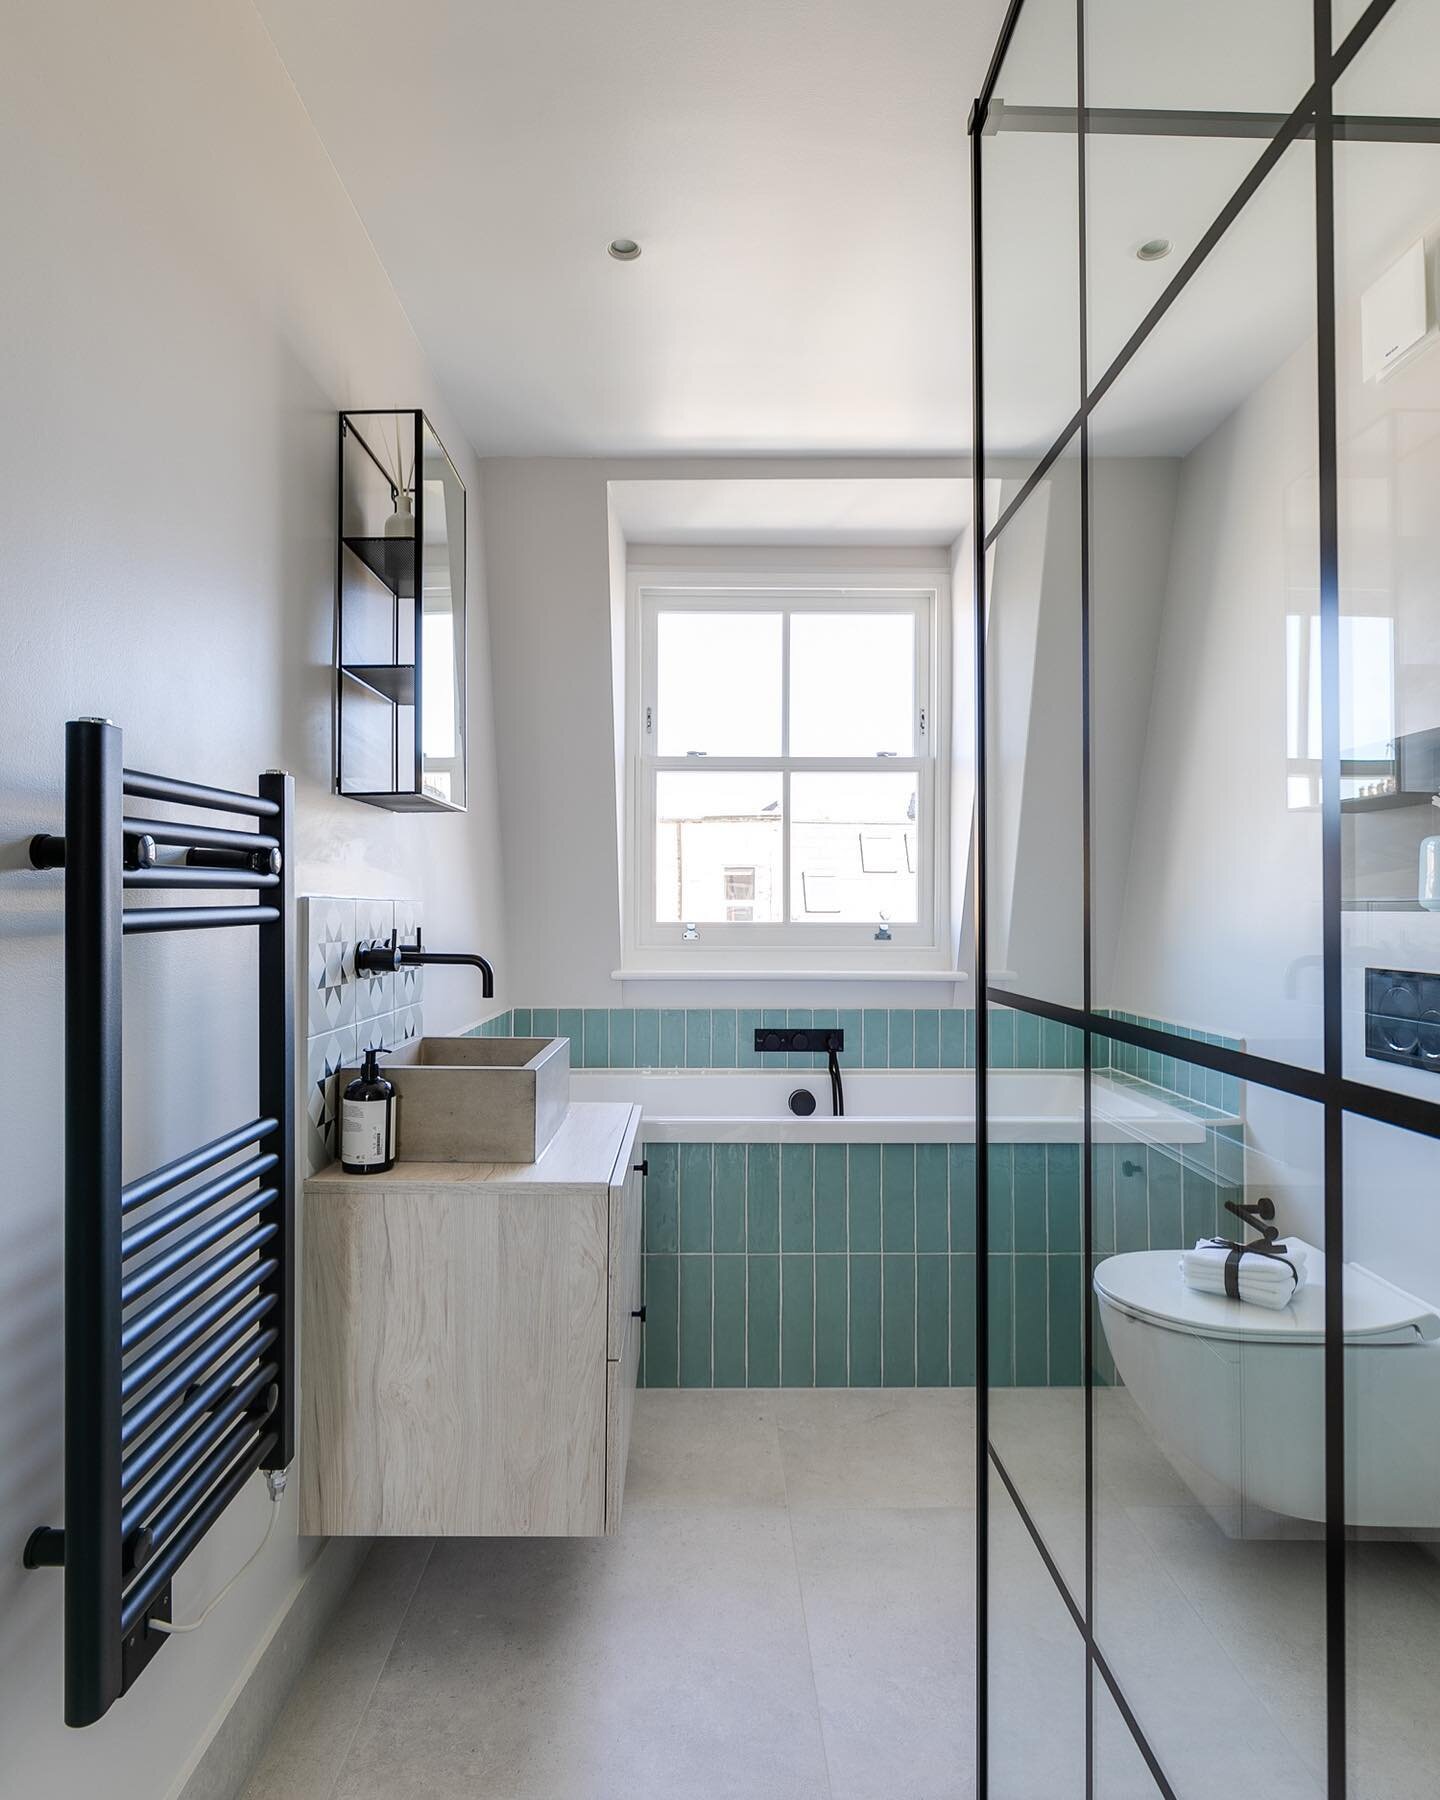 Escape to a peaceful oasis with our stylish industrial shower screens

.⁠
.⁠
.⁠
 #projectlondon #homerenovation #interiordesign #houseextensions #maximisespace #greenkitchen #slidingdoors #summerhomestyle #nottinghillhomes #homeimprovement #homedecor